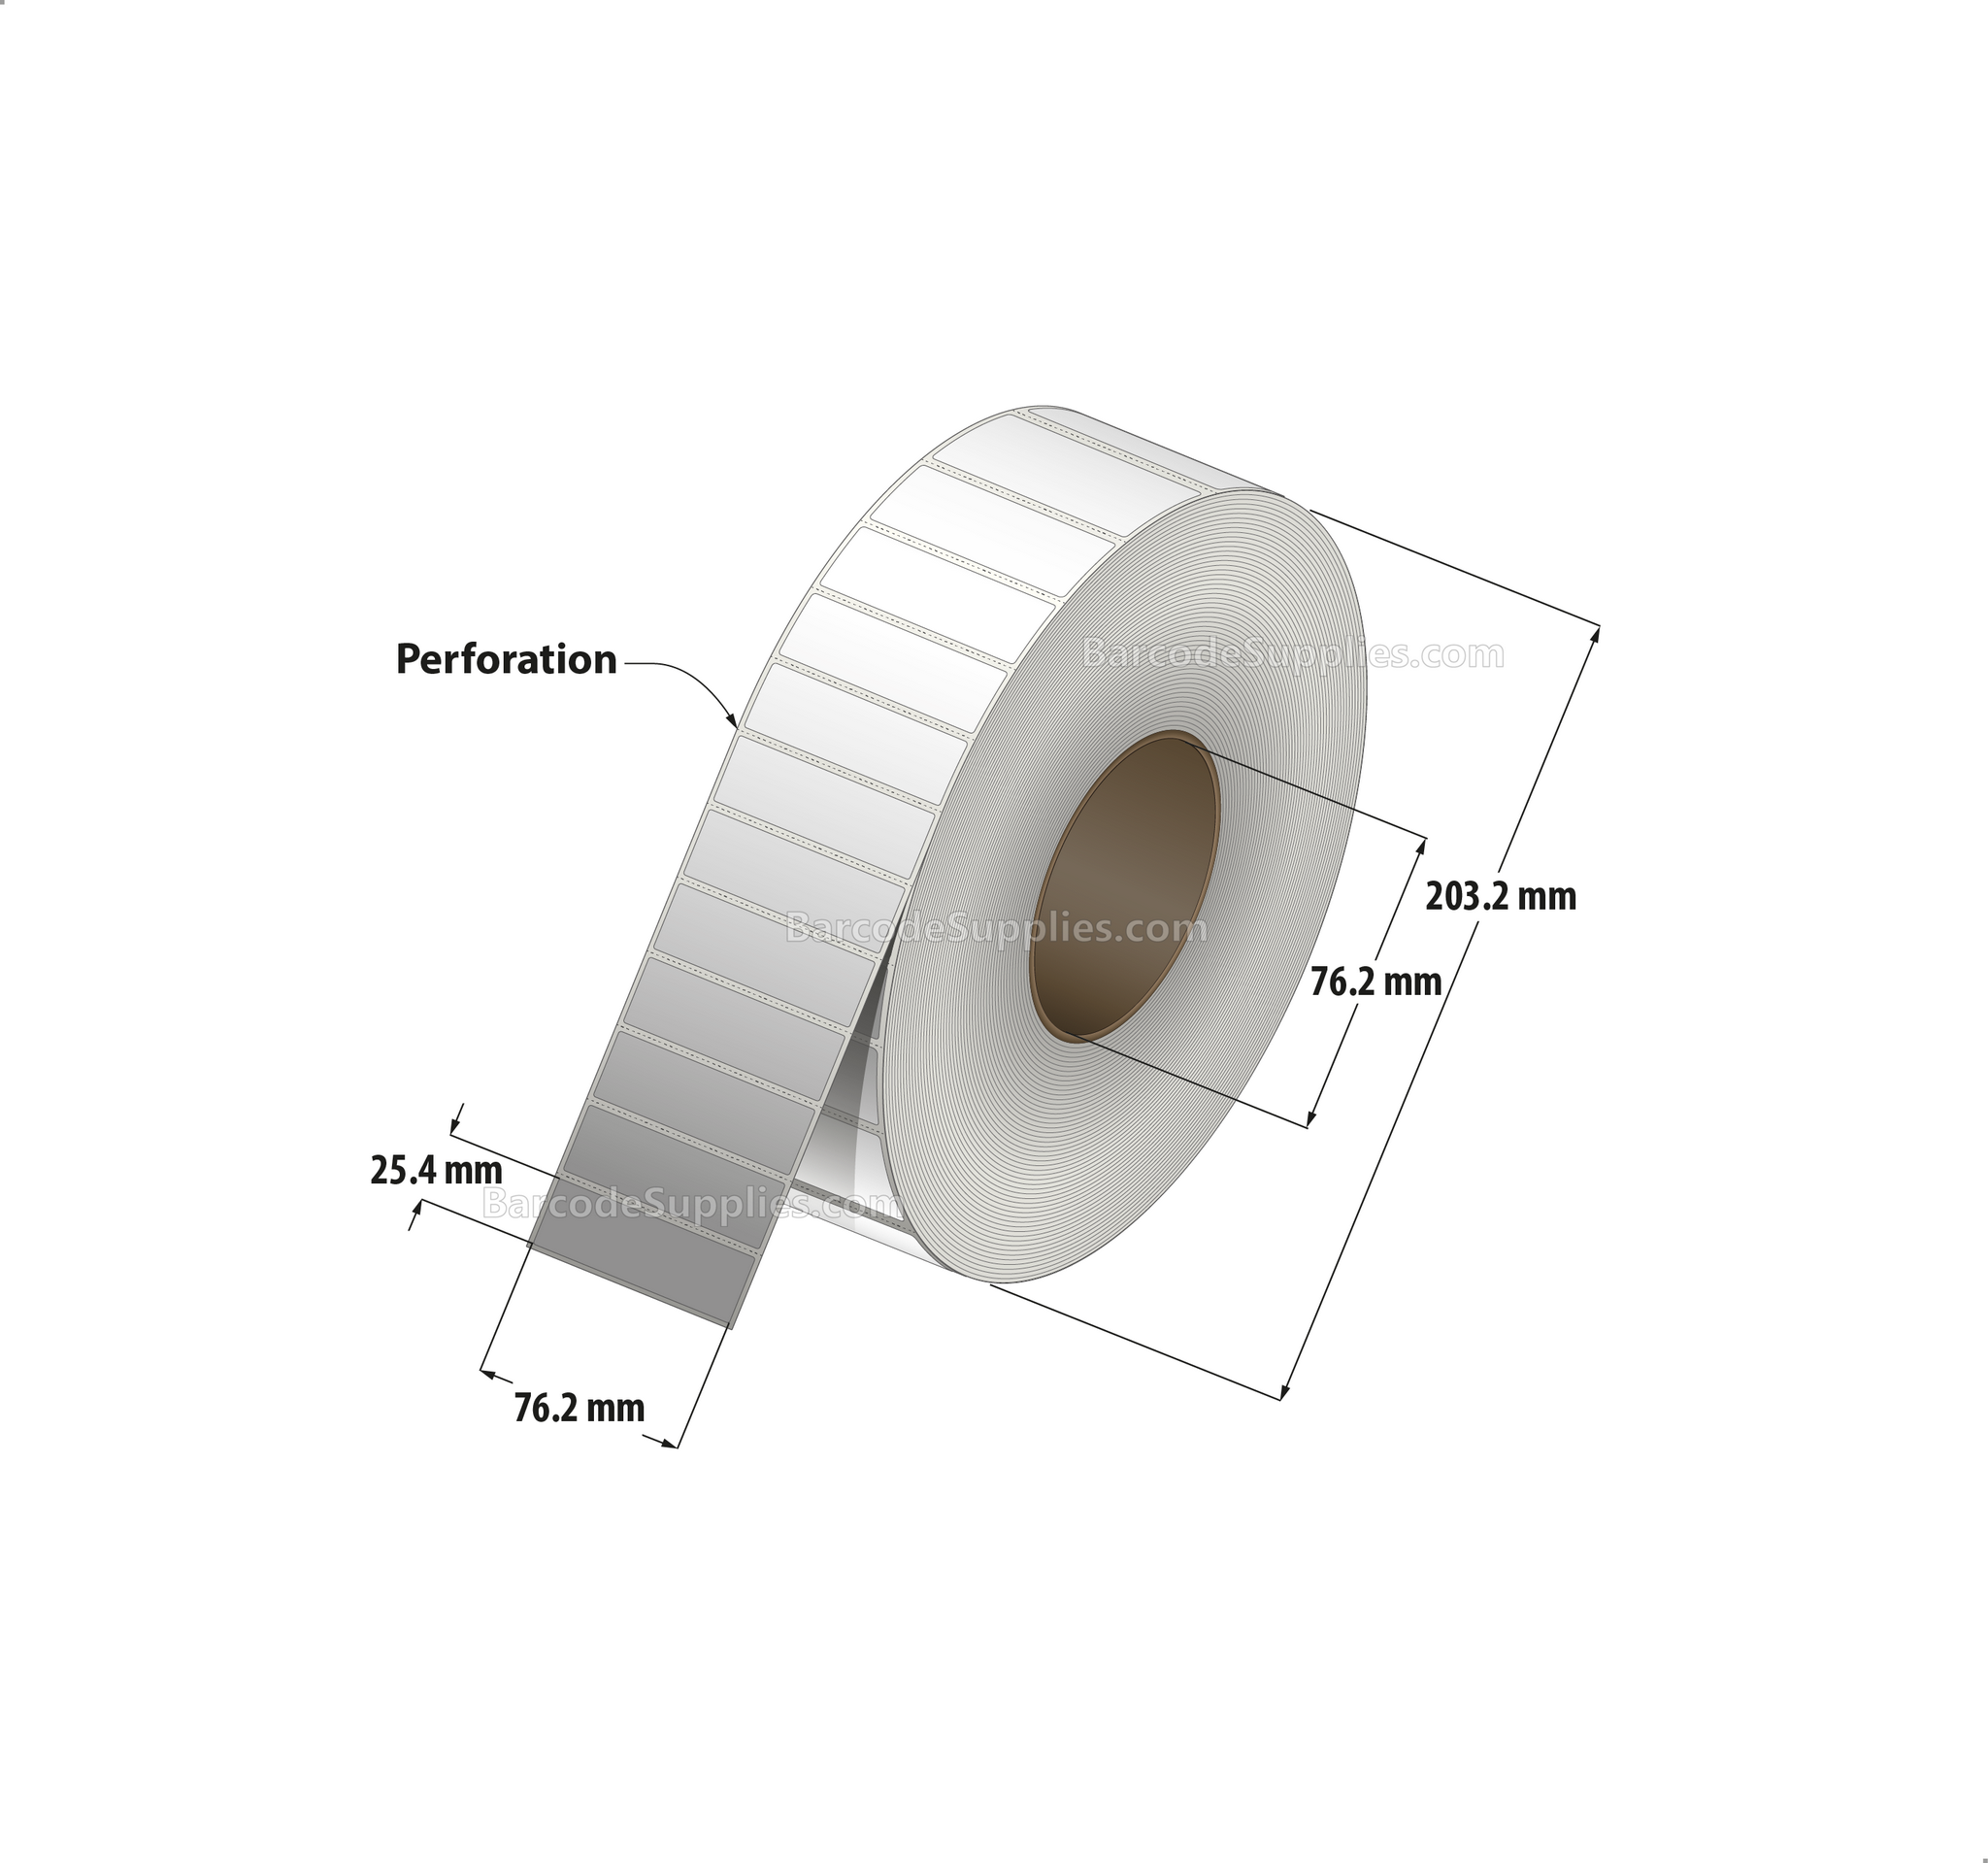 3 x 1 Thermal Transfer White Labels With Removable Adhesive - Perforated - 5500 Labels Per Roll - Carton Of 8 Rolls - 44000 Labels Total - MPN: RE-3-1-5500-3